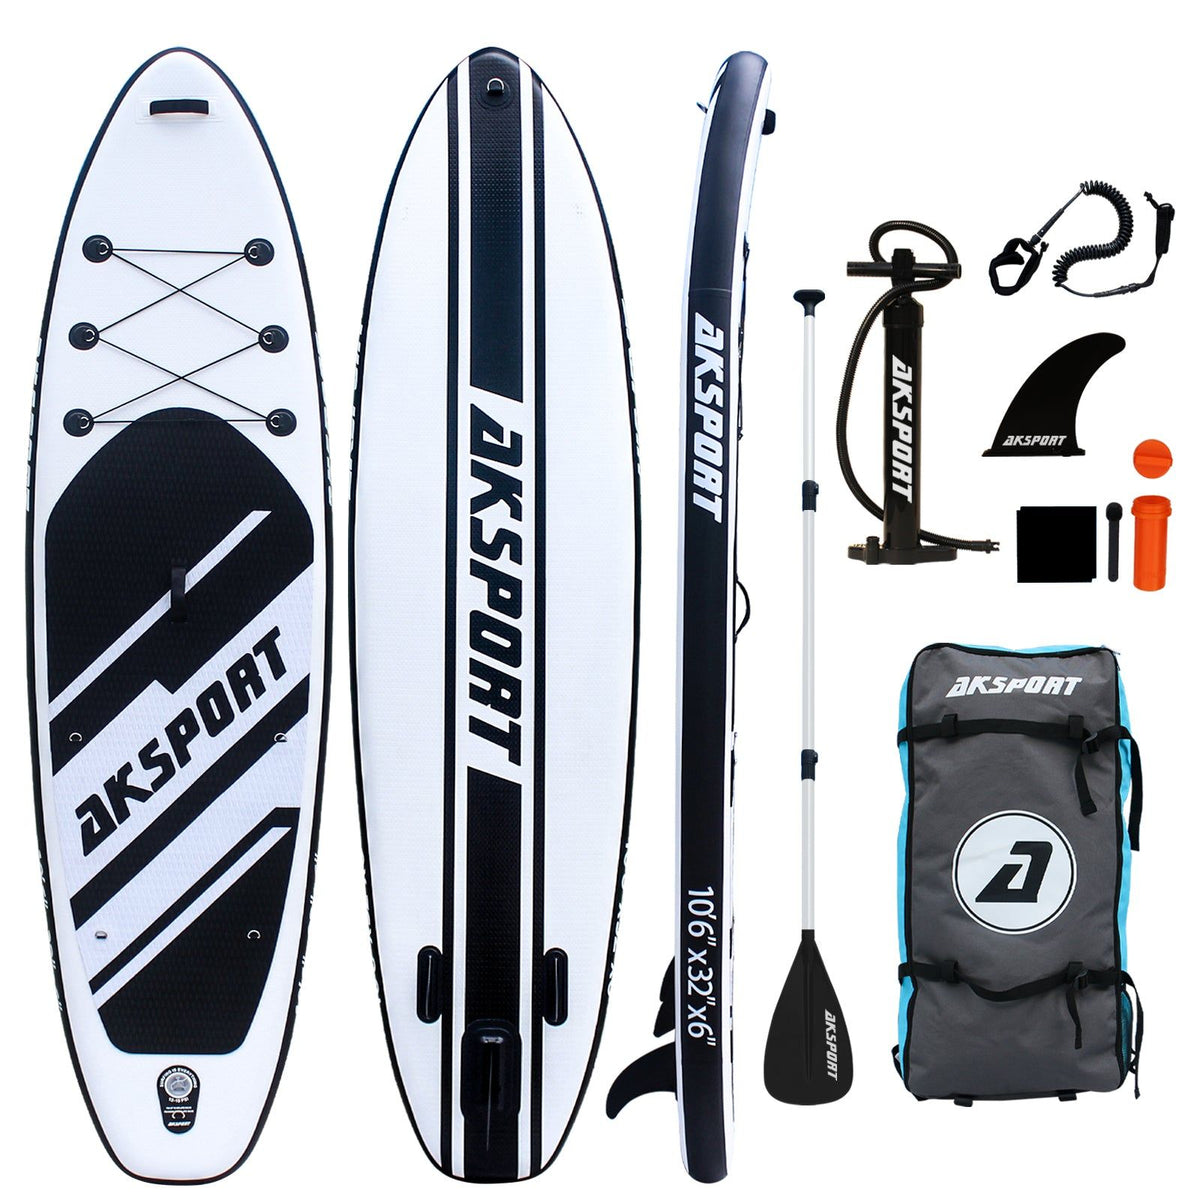 AKSPORT 10'6" Inflatable Stand-up Paddle Board Package Black - AKSPORT